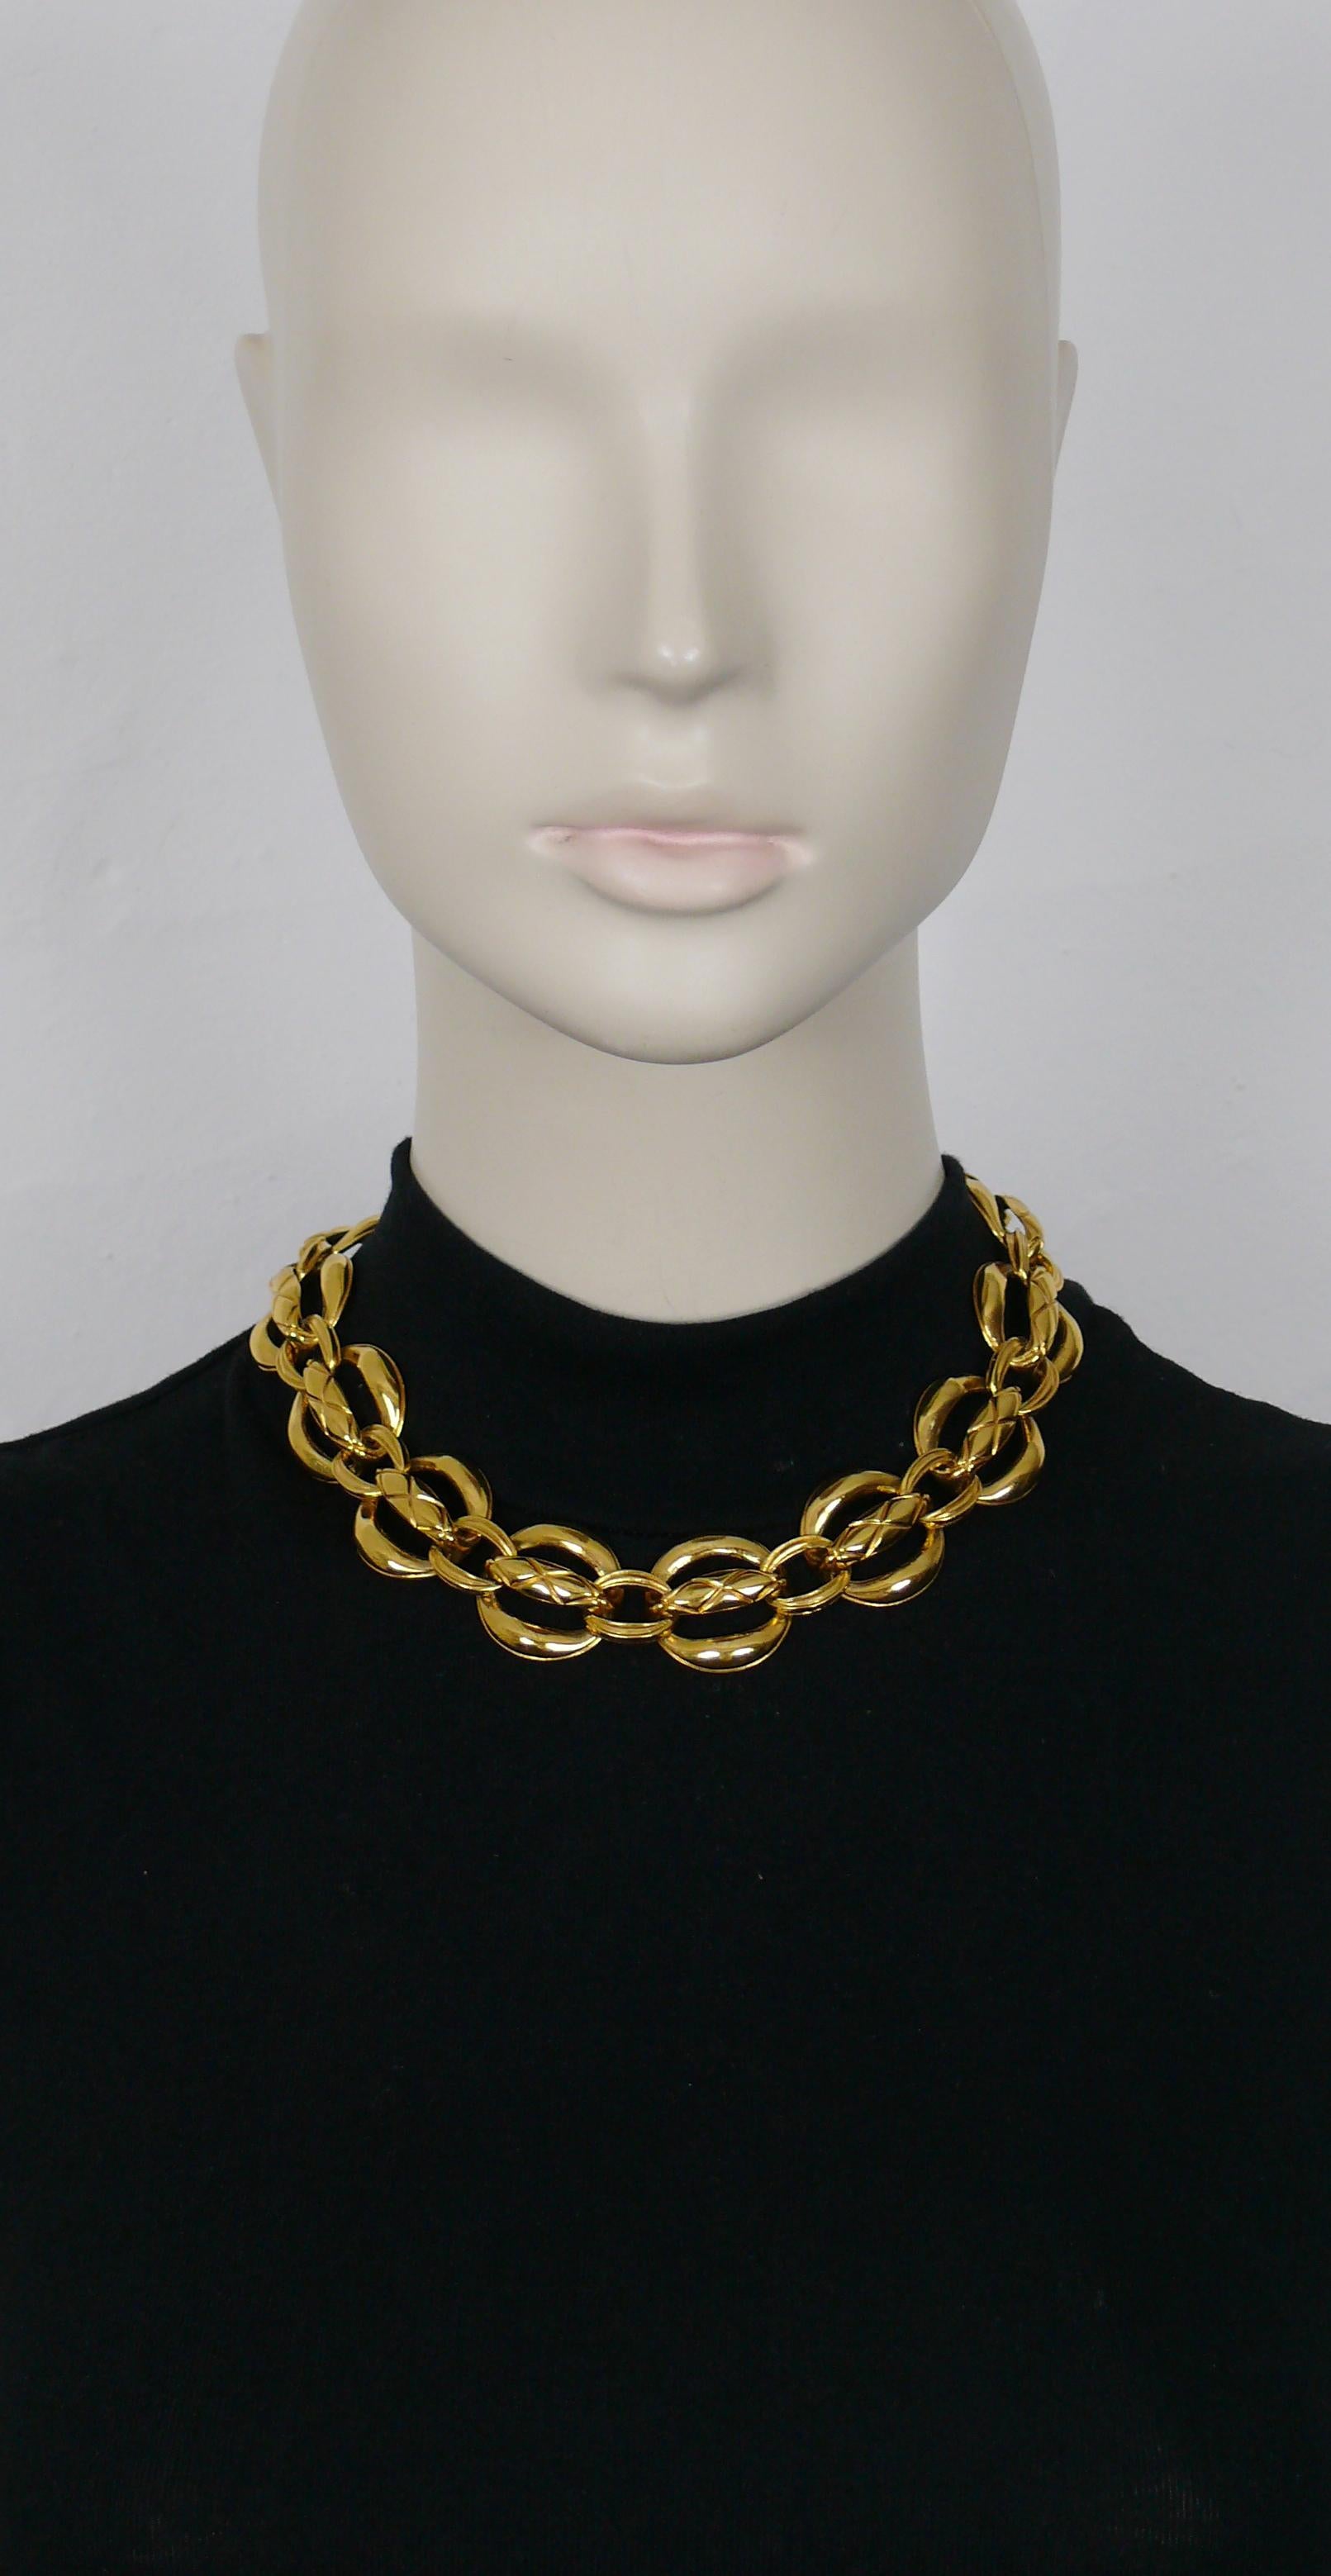 CHANEL vintage gold toned quilted link chain necklace.

Hook clasp closure.

Embossed CHANEL Made in France.

Indicative measurements : length approx. 40 cm (15.75 inches) / link width approx. 2.5 cm (0.98 inch).

NOTES
- This is a preloved vintage